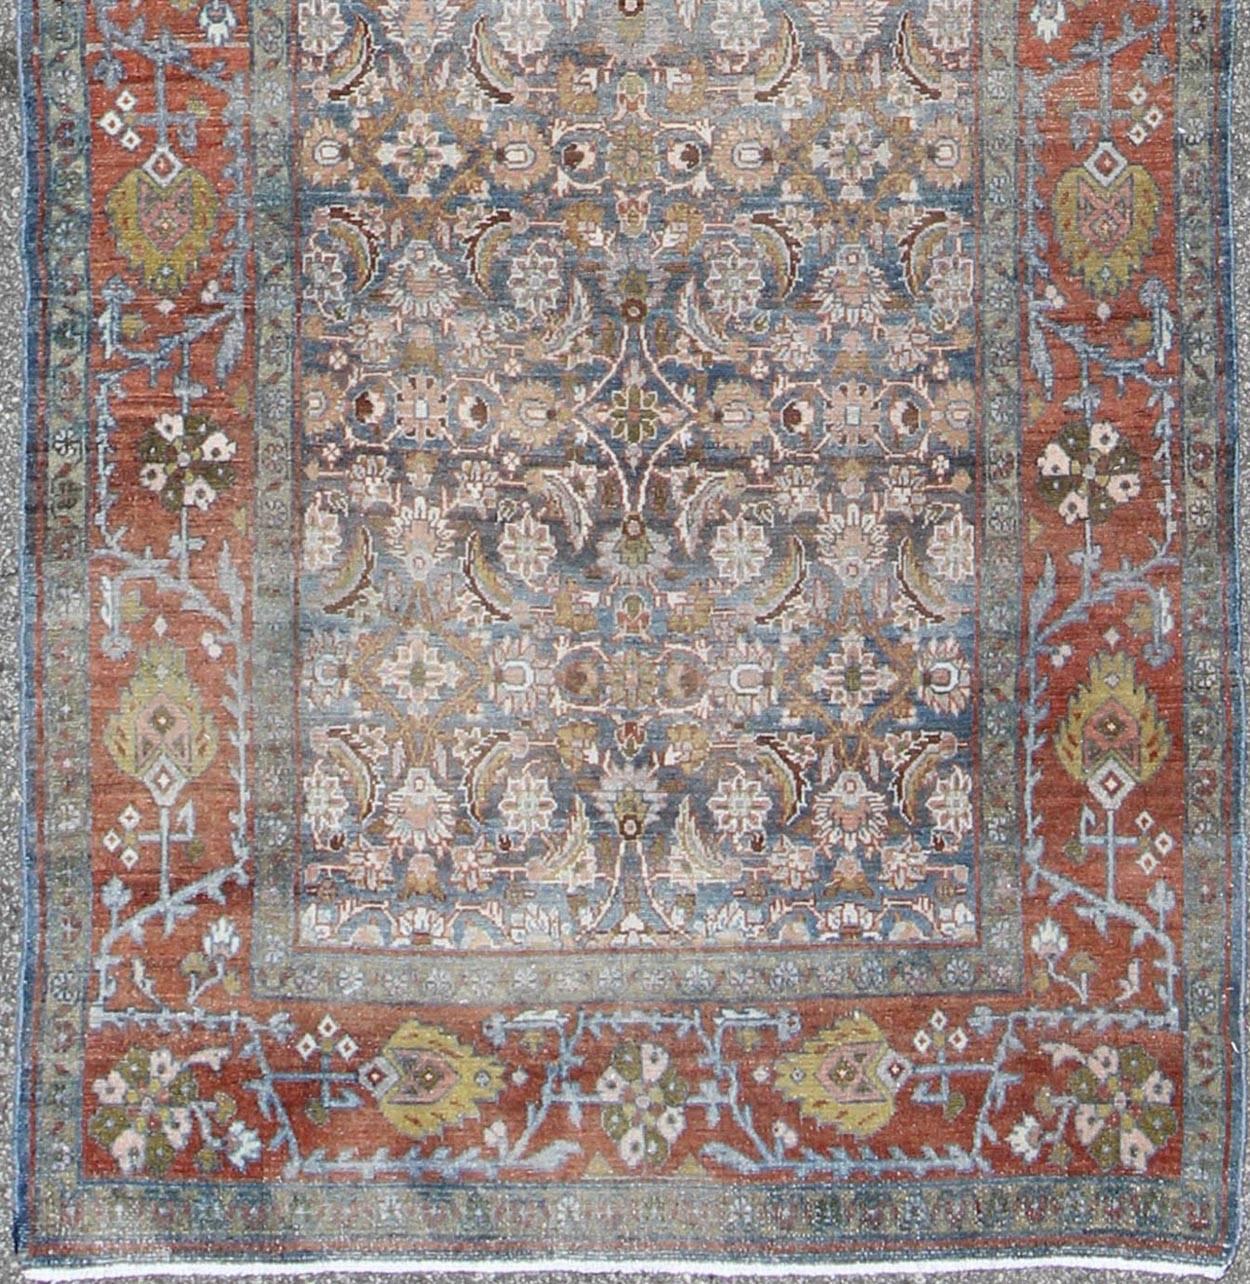 Blue, red and green antique Persian Malayer runner with geometric floral design, rug na-160083, country of origin / type: Iran / Malayer, circa 1920

This magnificent early 20th century vintage Persian Malayer runner bears a beautiful, all-over